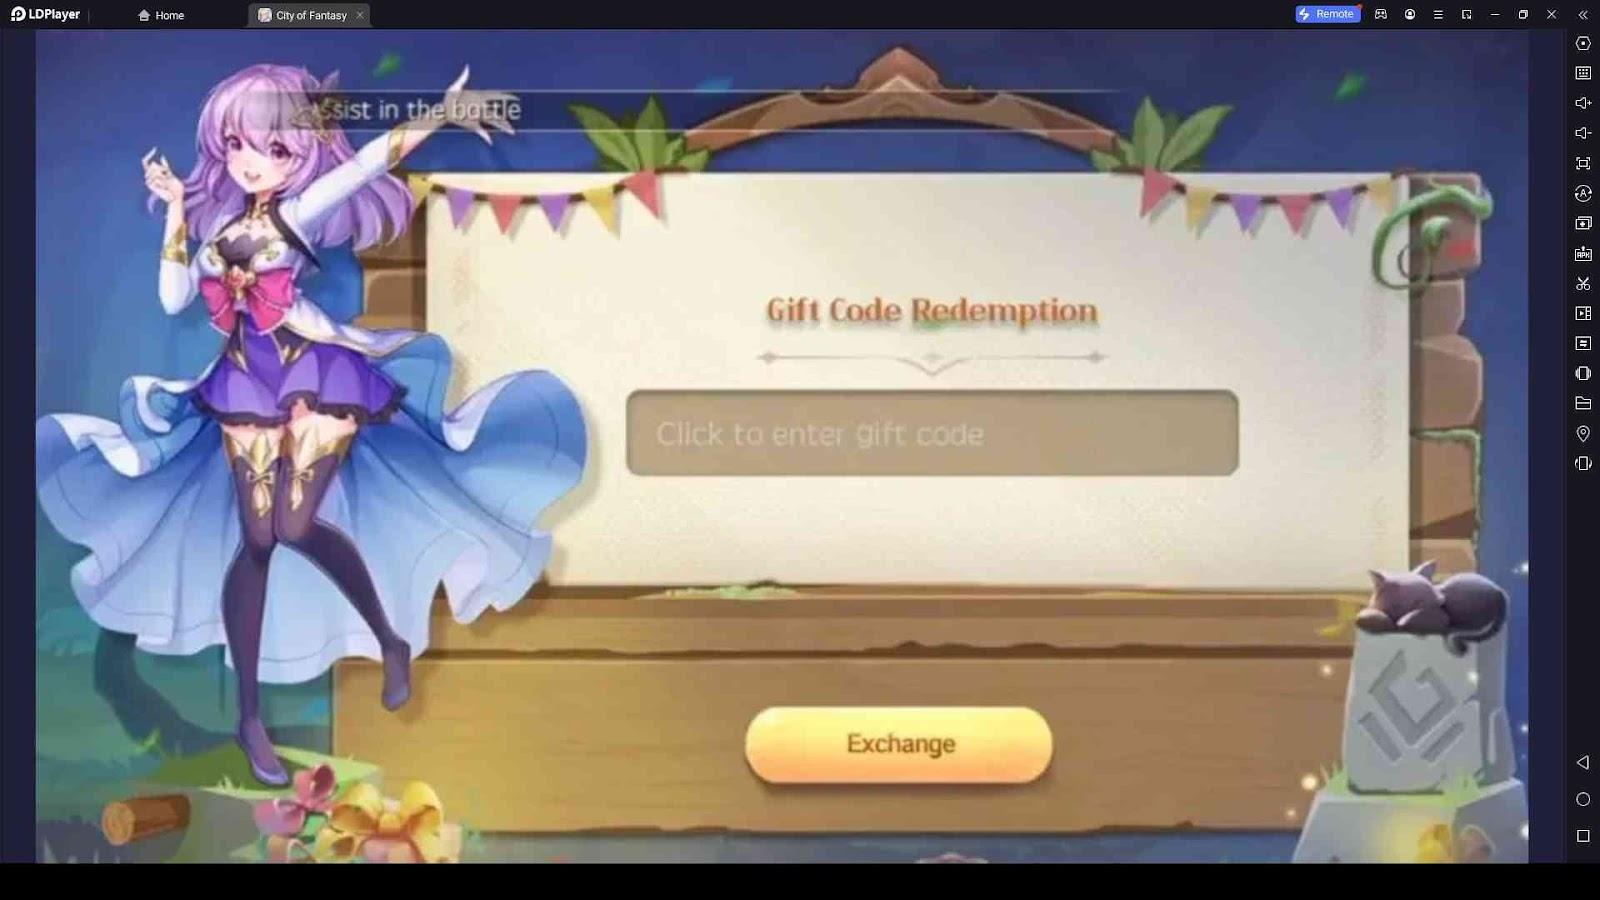 Redeeming Your Codes in City of Fantasy